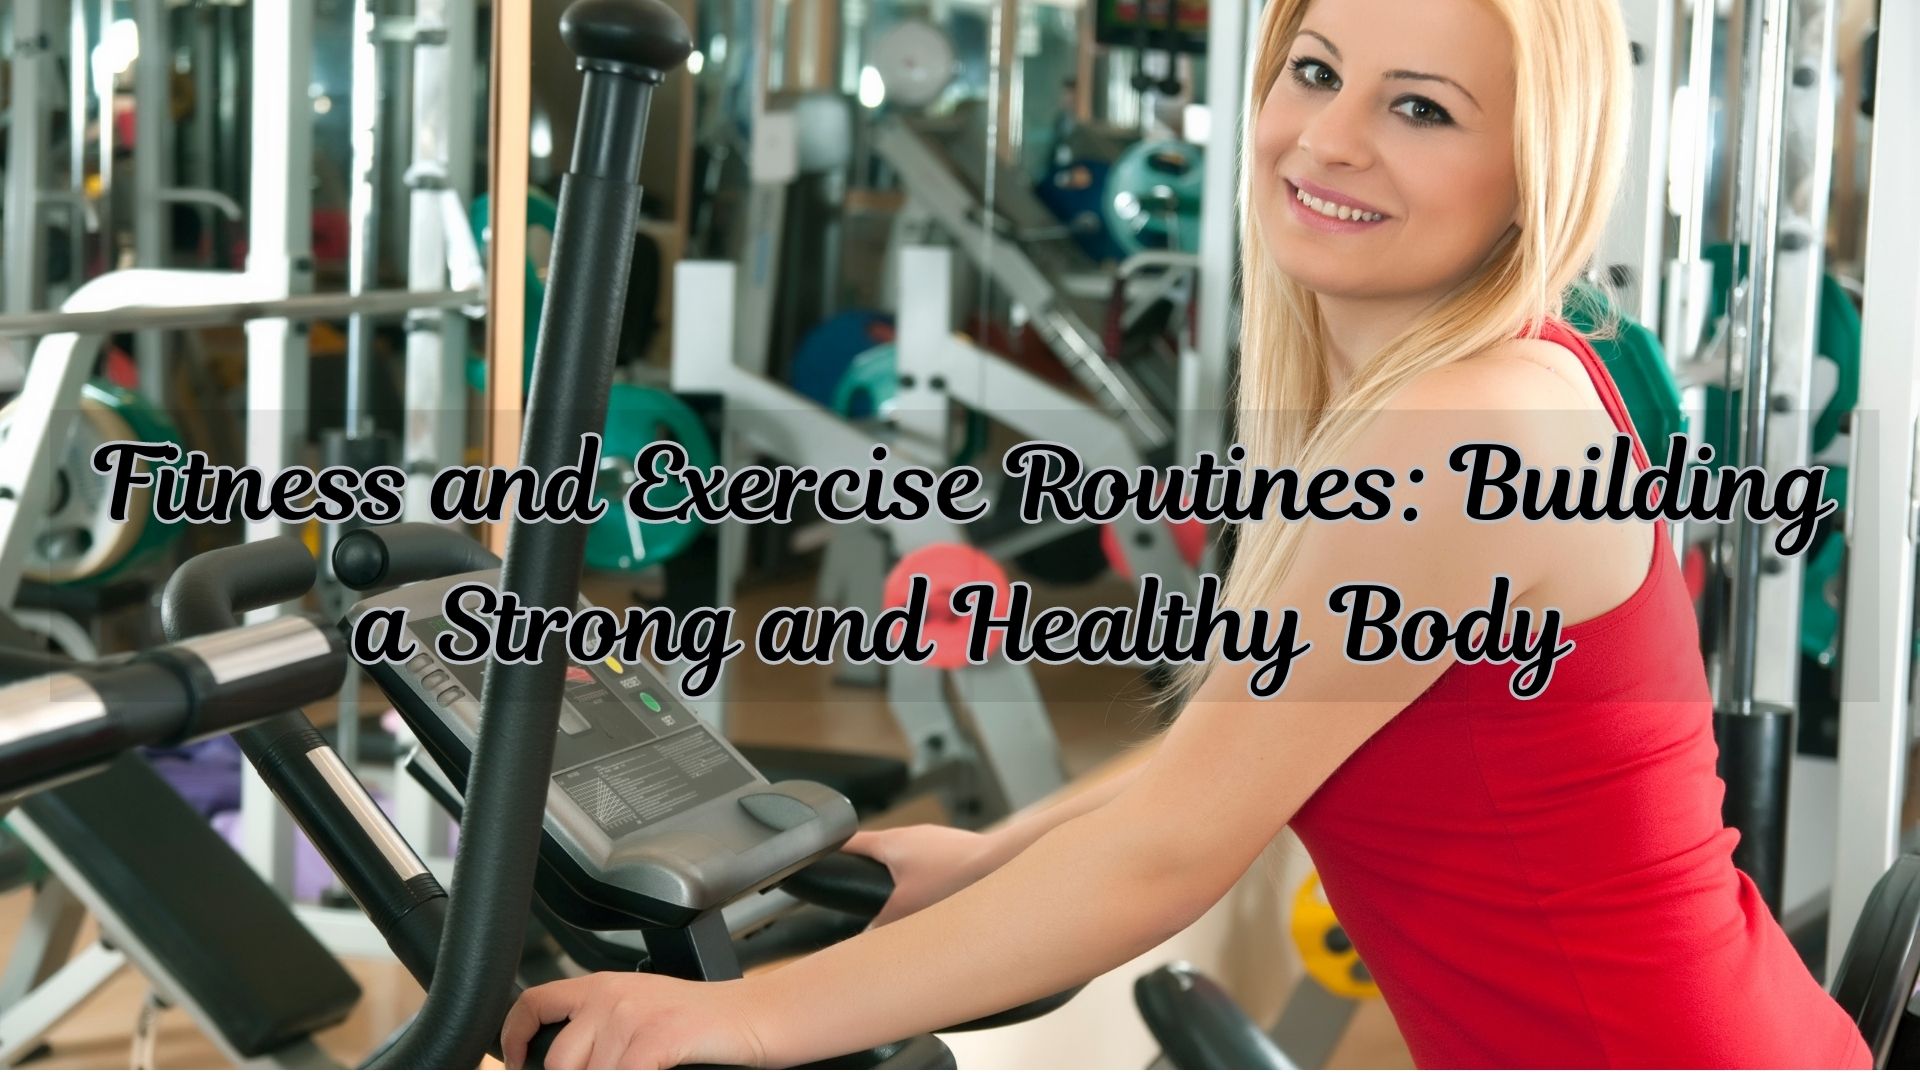 Fitness and Exercise Routines: Building a Strong and Healthy Body